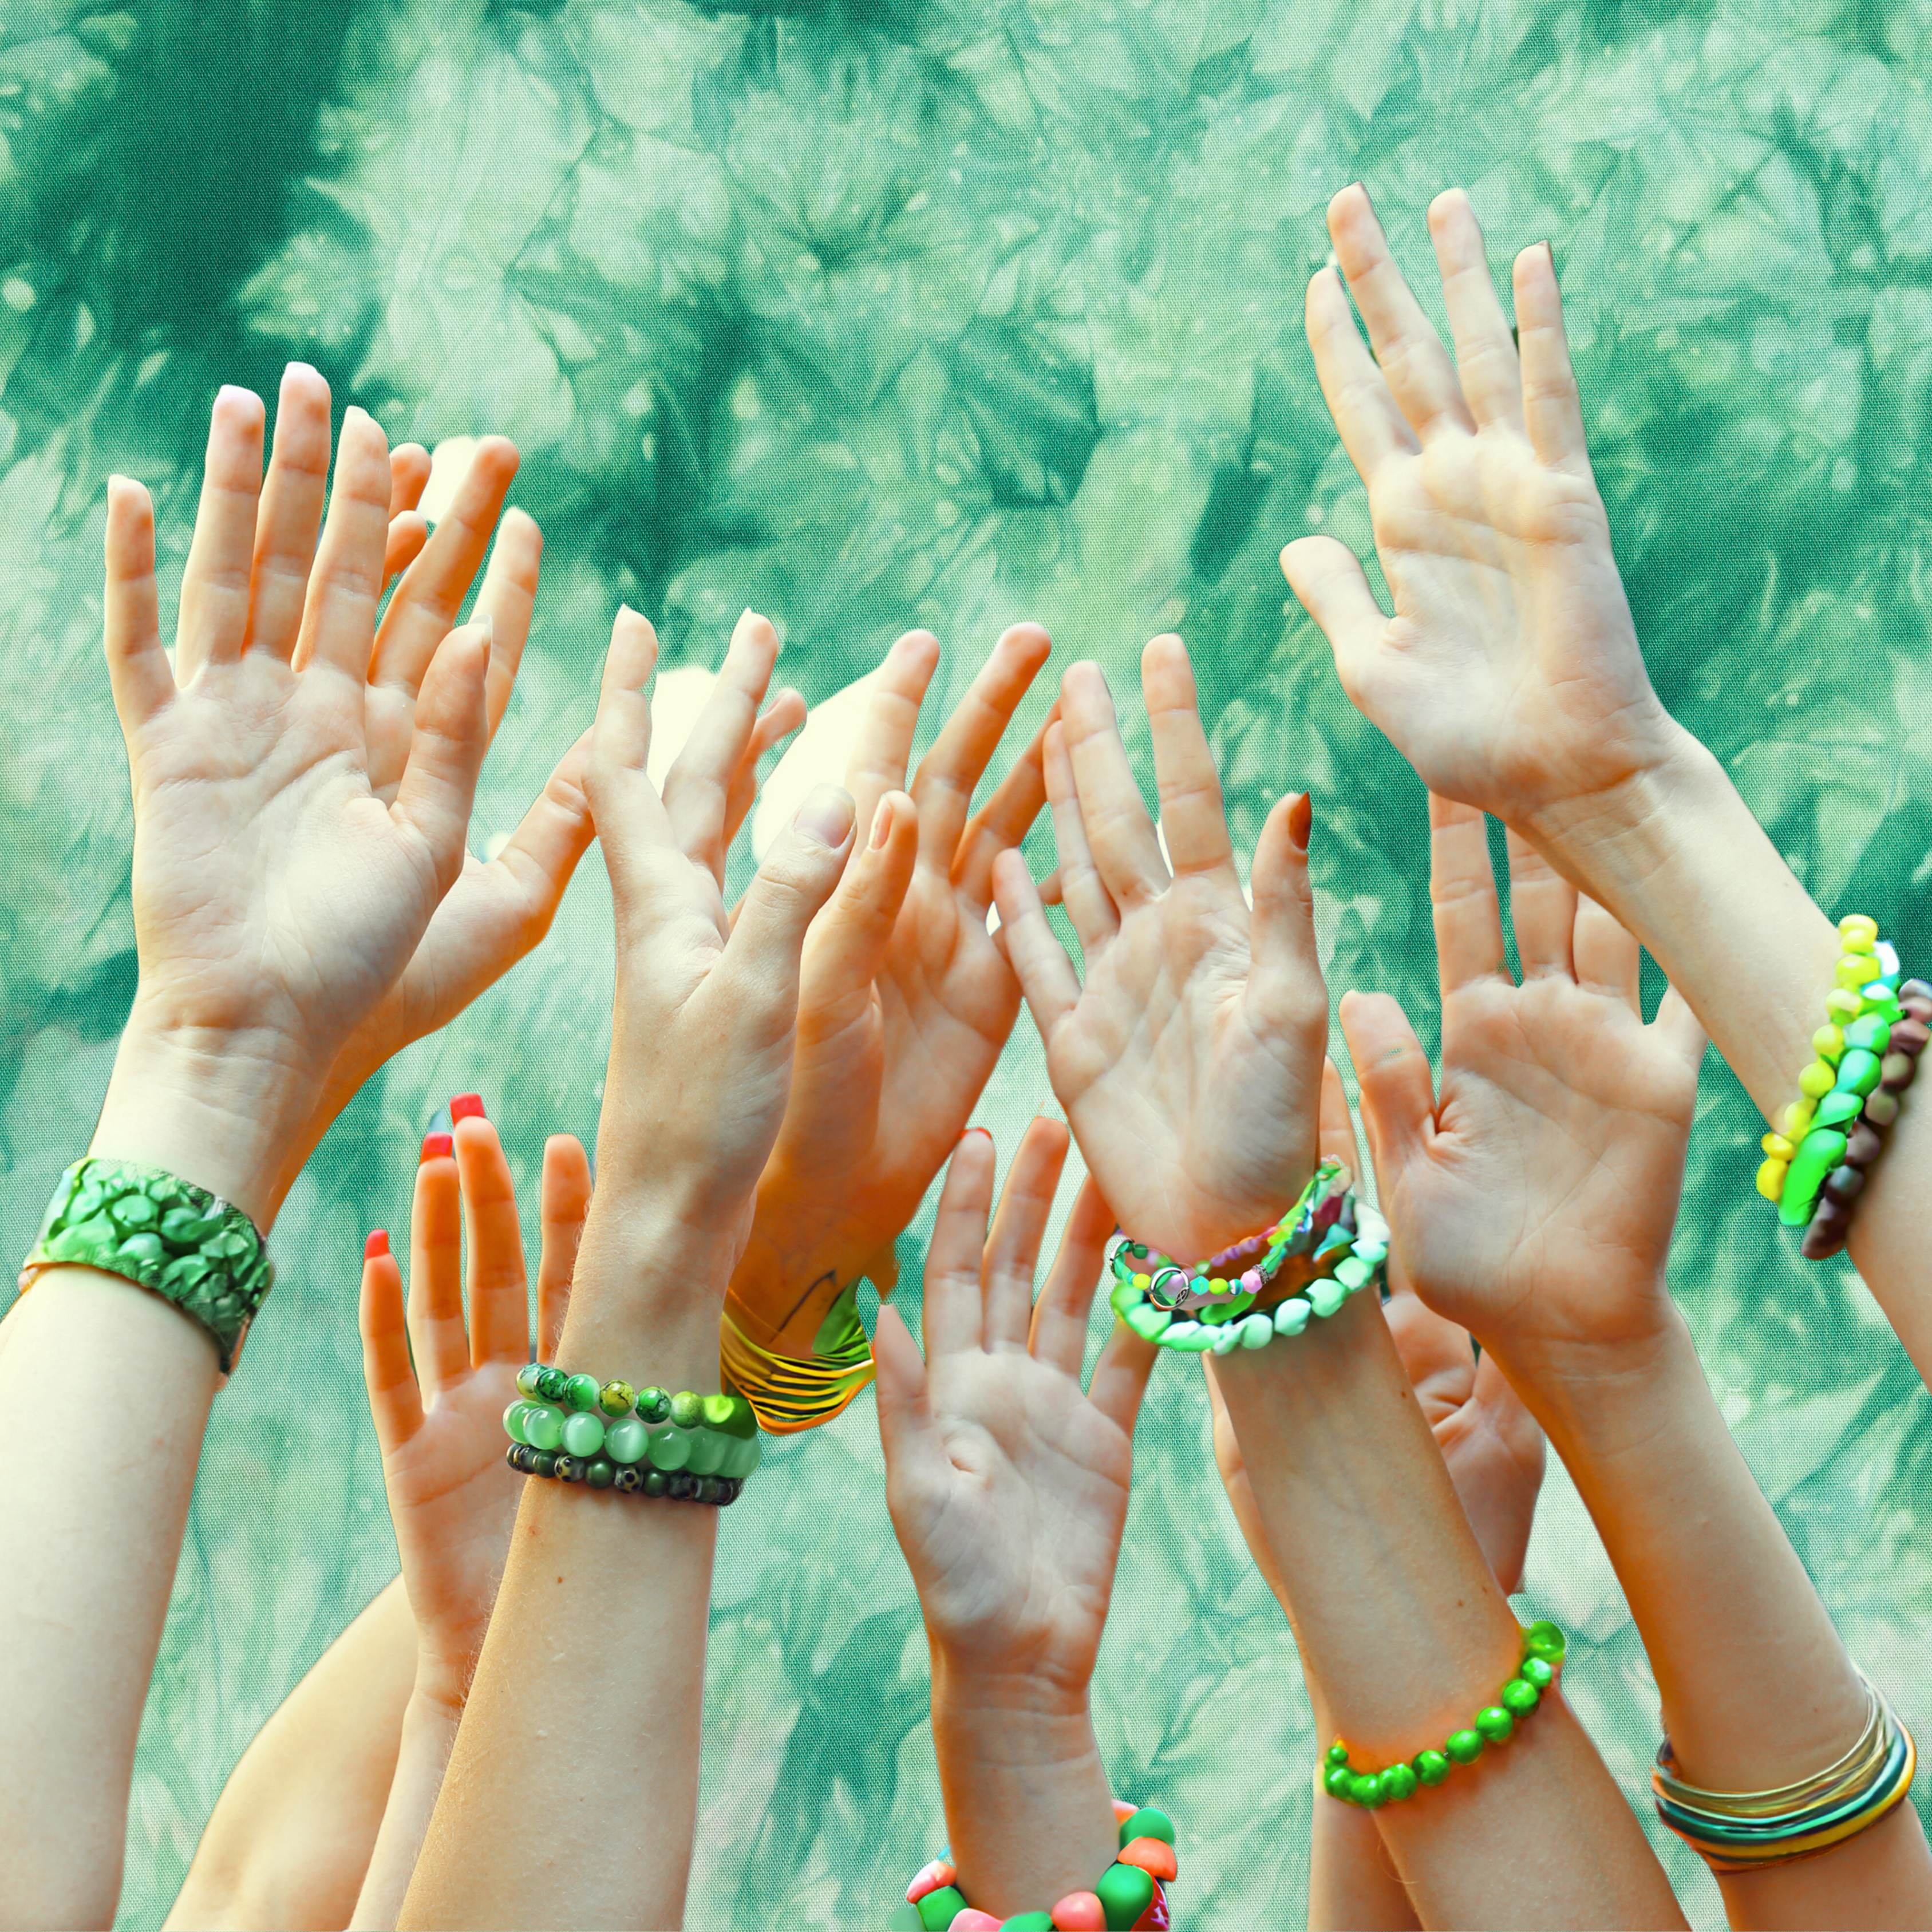 A group of hands reaching up to the sky with a green tye dye background and lots of green bracelets on the wrists